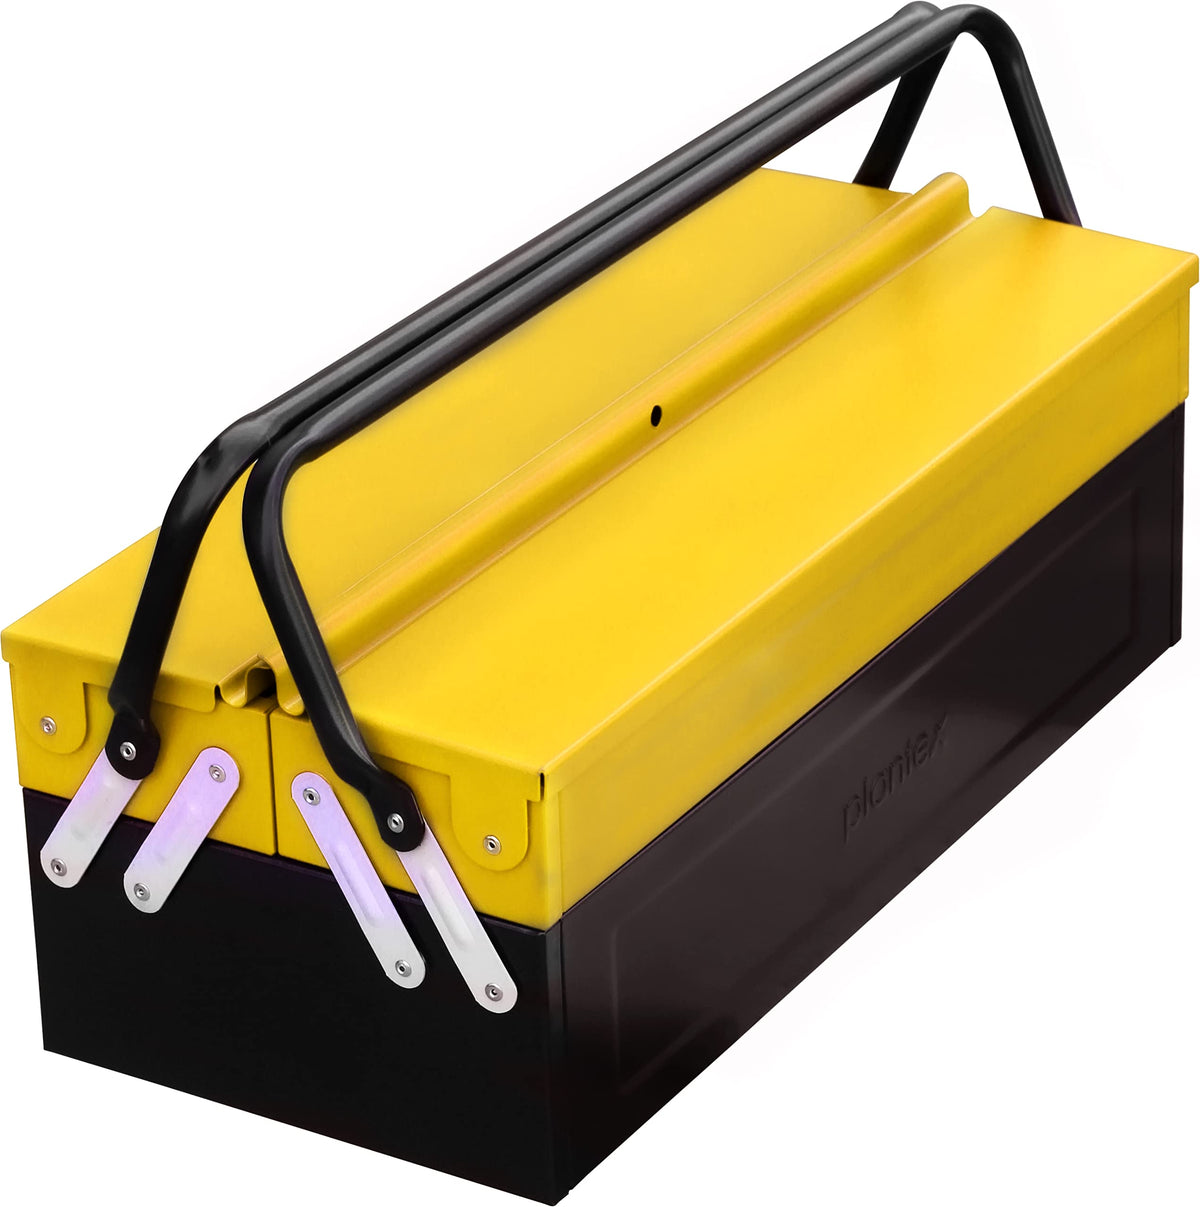 Plantex High Grade Metal Tool Box for Tools/Tool Kit Box for Home and Garage/Tool Box Without Tools-3 Compartment (Yellow & Black)